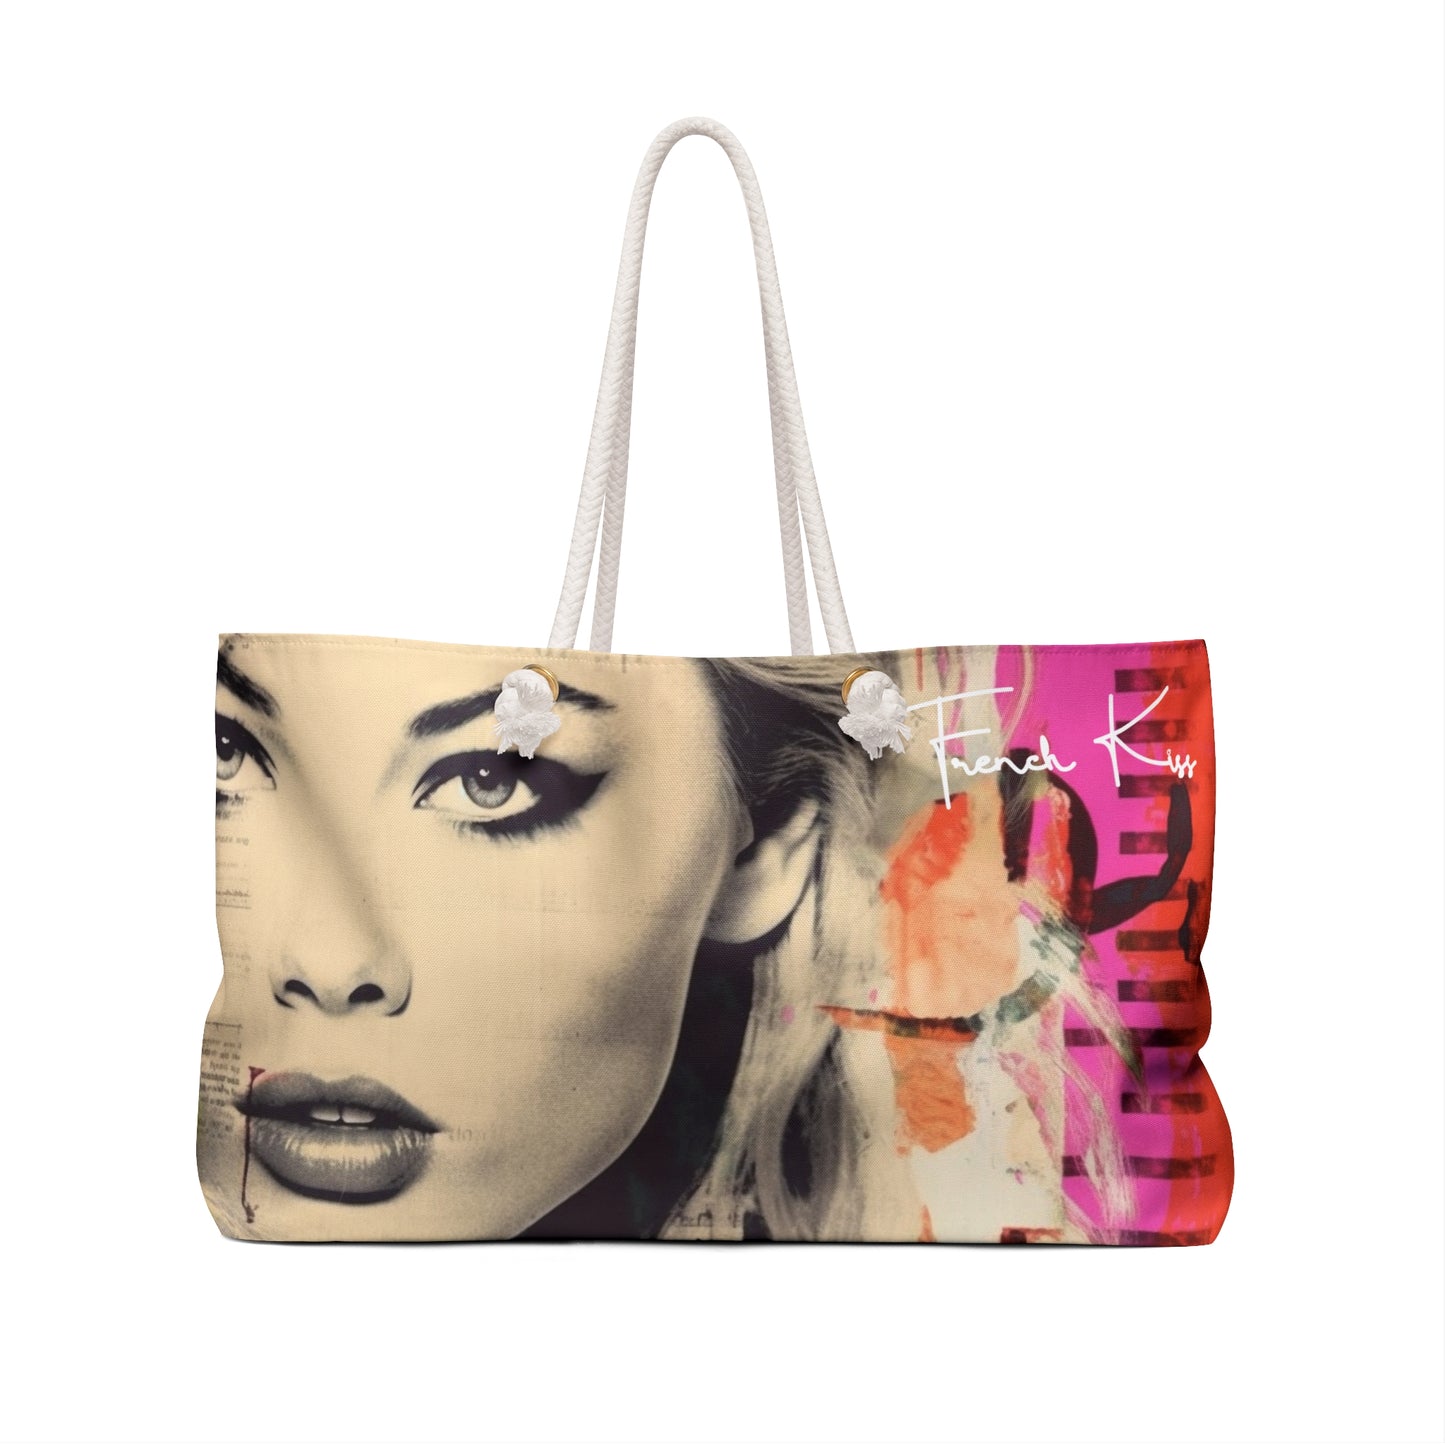 GLAMOUR Sassy Sexy Chic Weekender Accessory Bag French Kiss Pop Art, Classy, Couture, Travel, Fashion, Beauty gift item